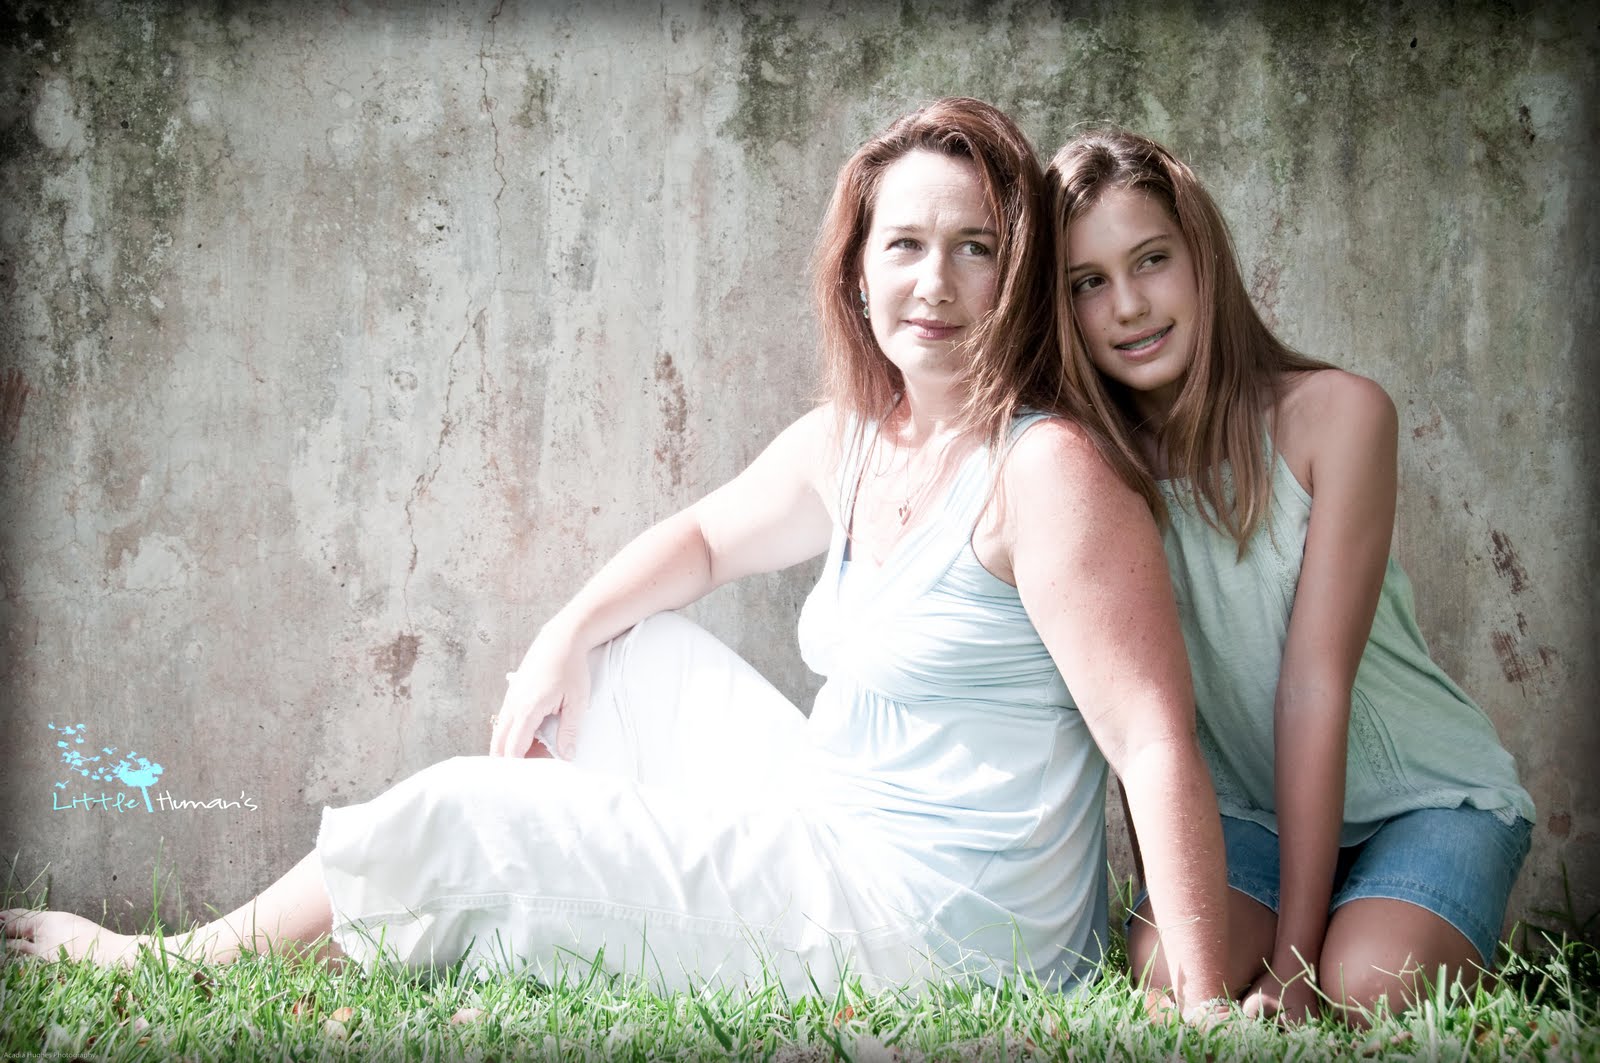 Mothers&Daughters Photos : Mothers + Daughters by DarkSonic250.